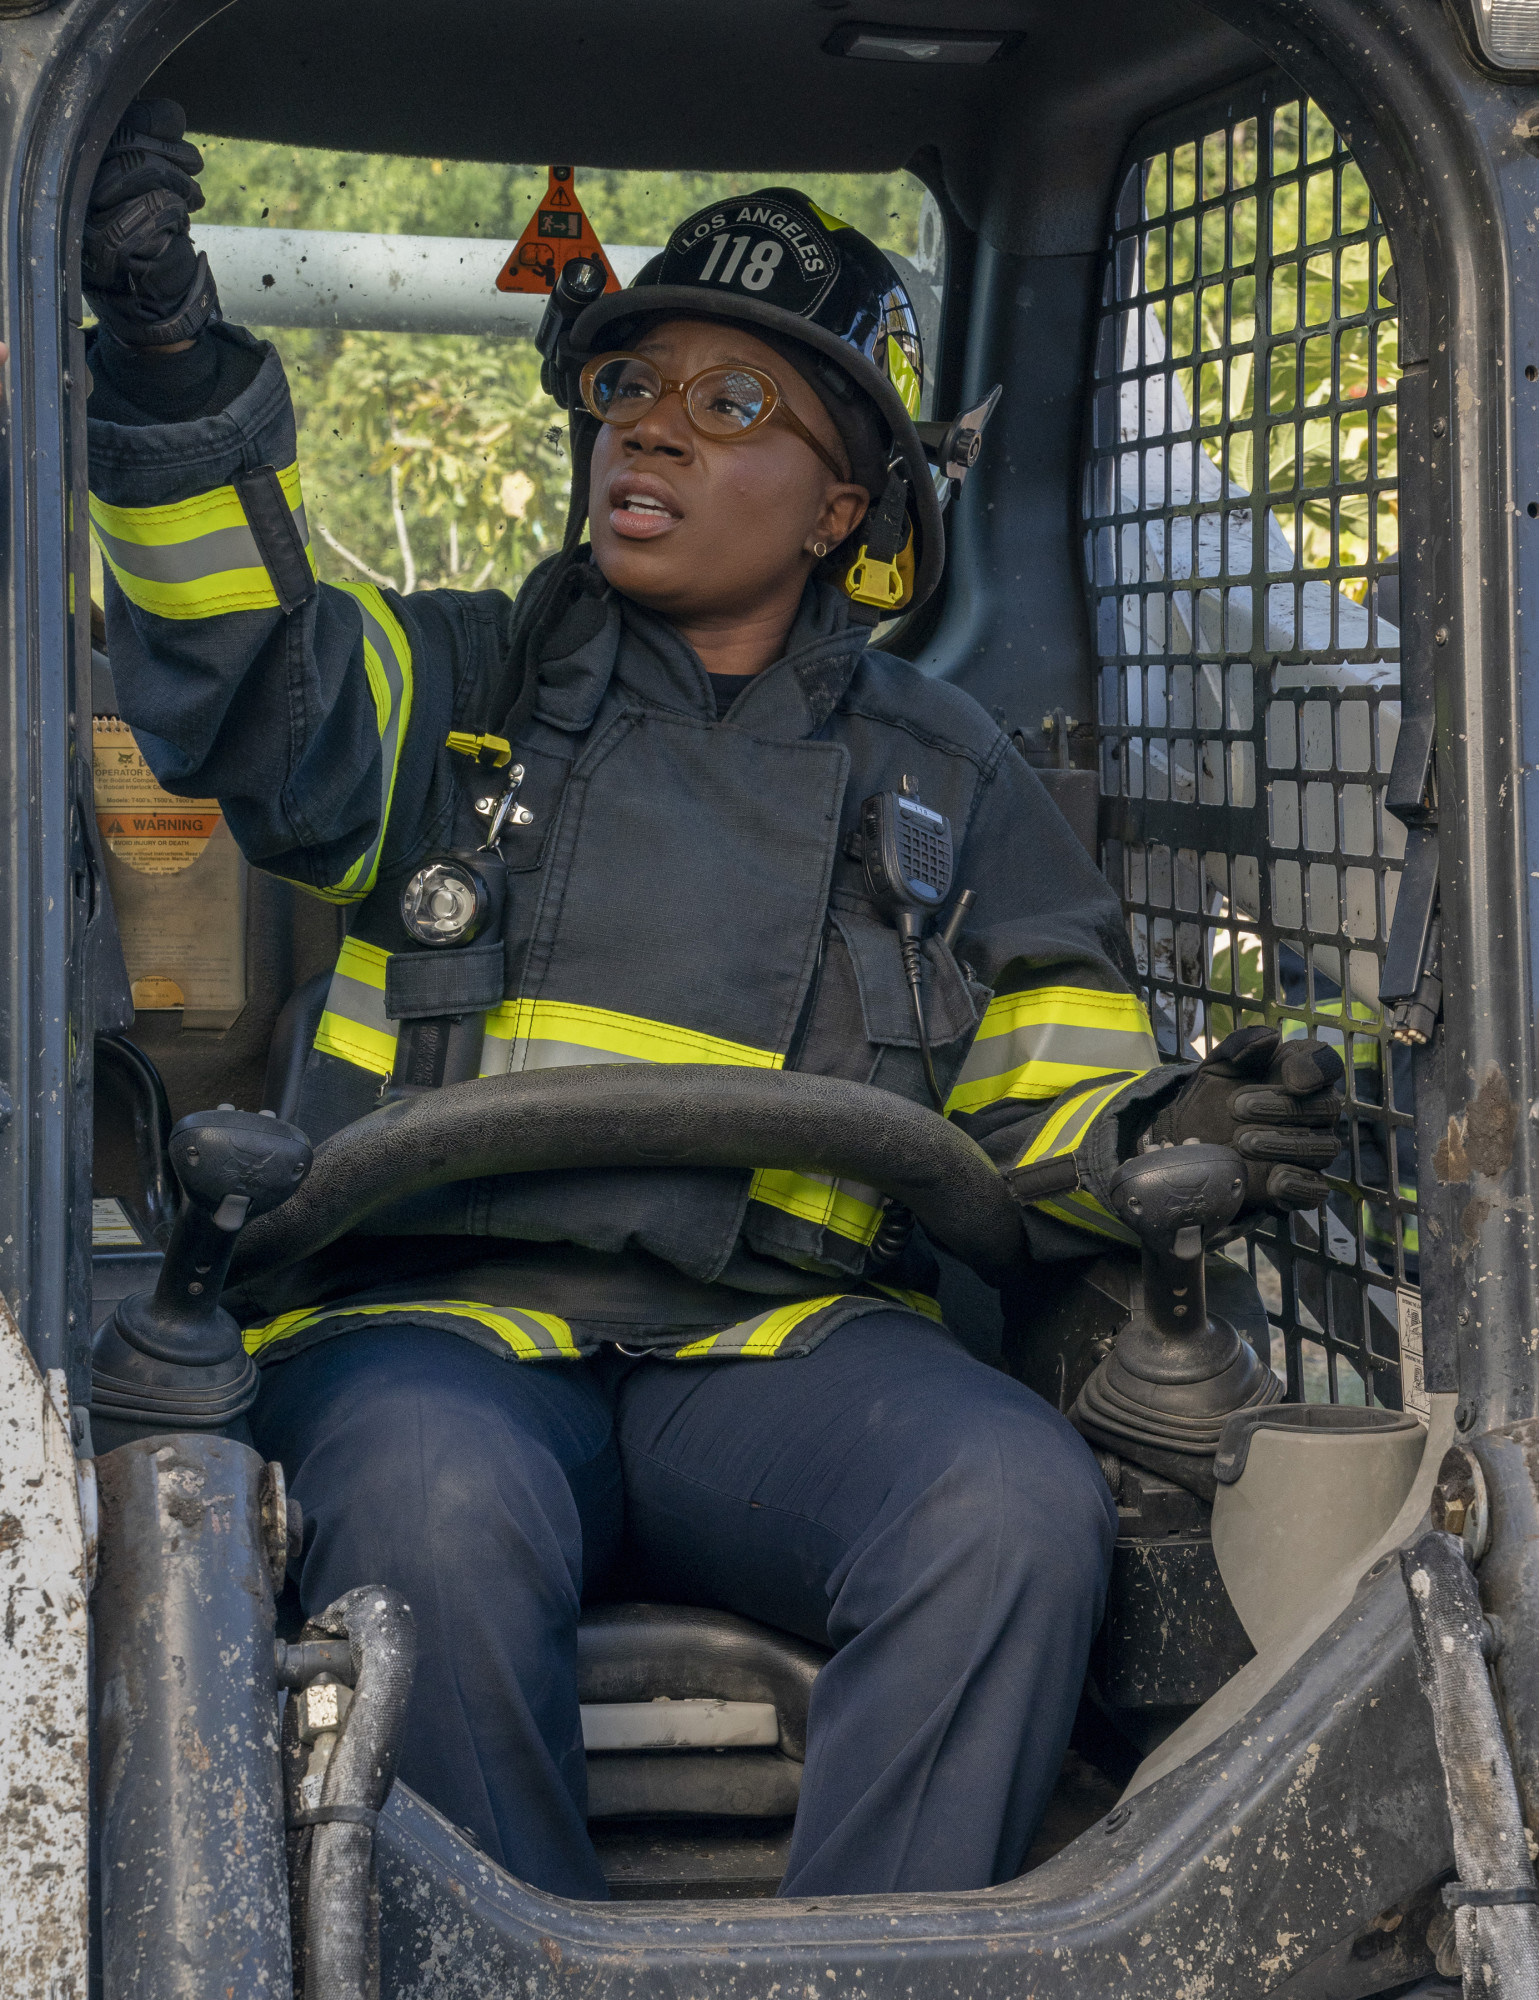 9-1-1: L-R: Aisha Hinds in the “Seize The Day” spring premiere episode of 9-1-1 airing Sunday, March 16 (8:00-9:00 PM ET/PT) on FOX. CR: Jack Zeman / FOX. © 2020 FOX MEDIA LLC.